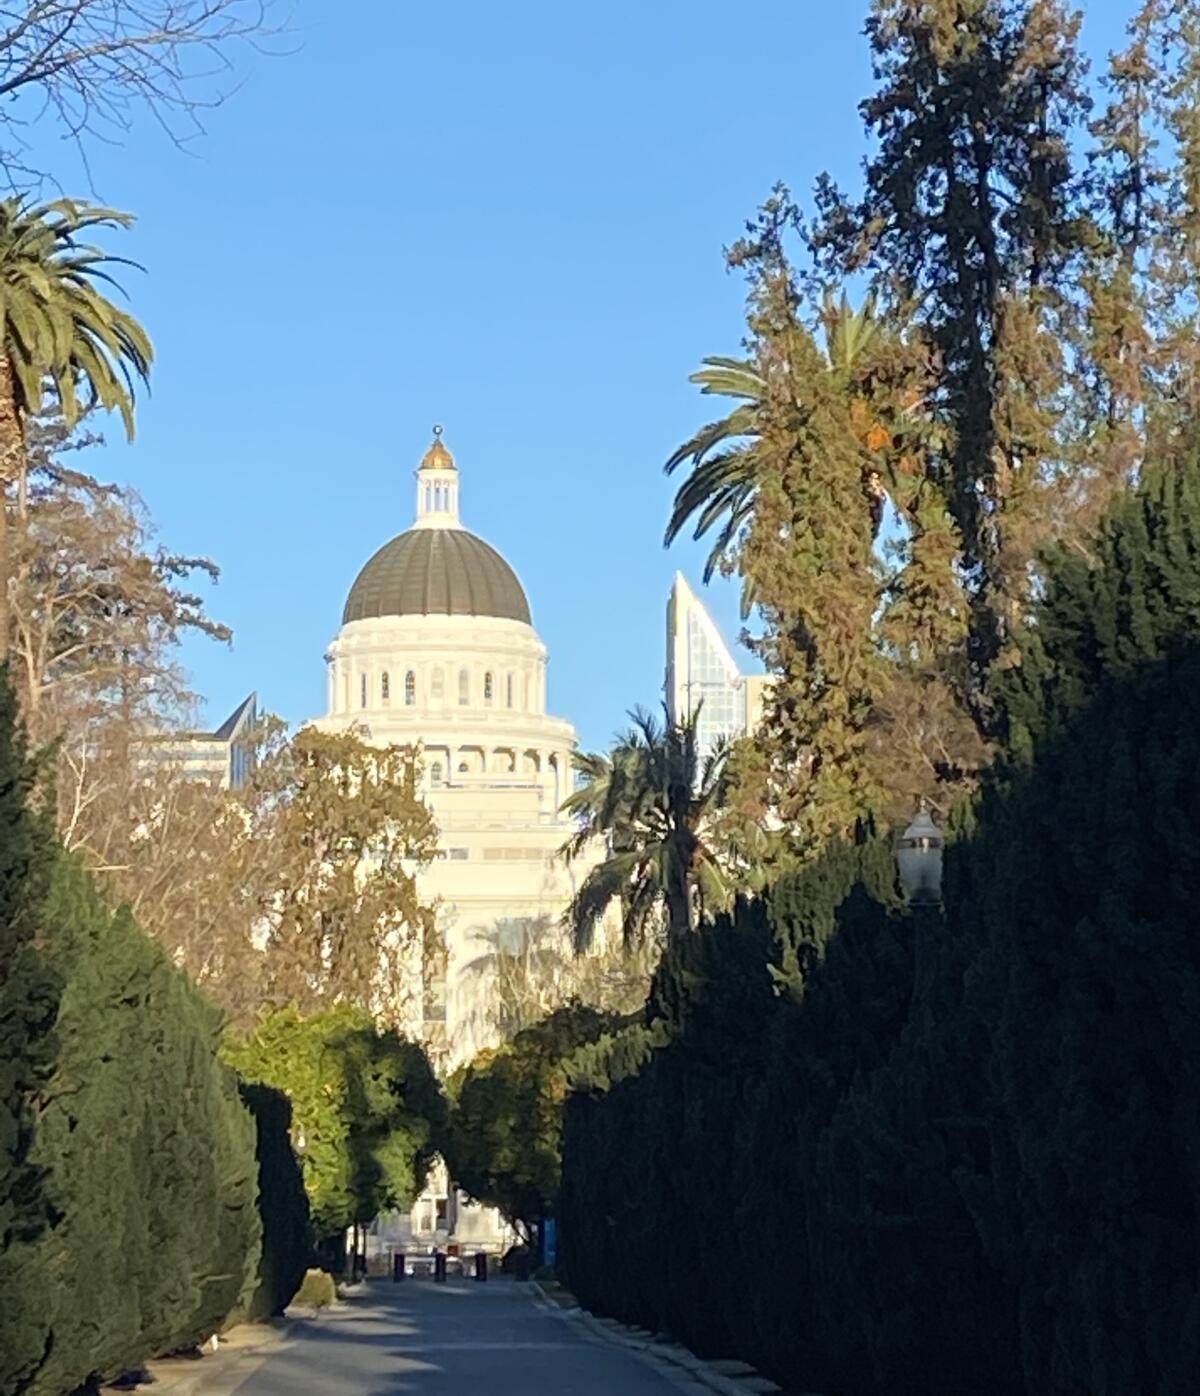 The tree-rich grounds of the California state Capitol.